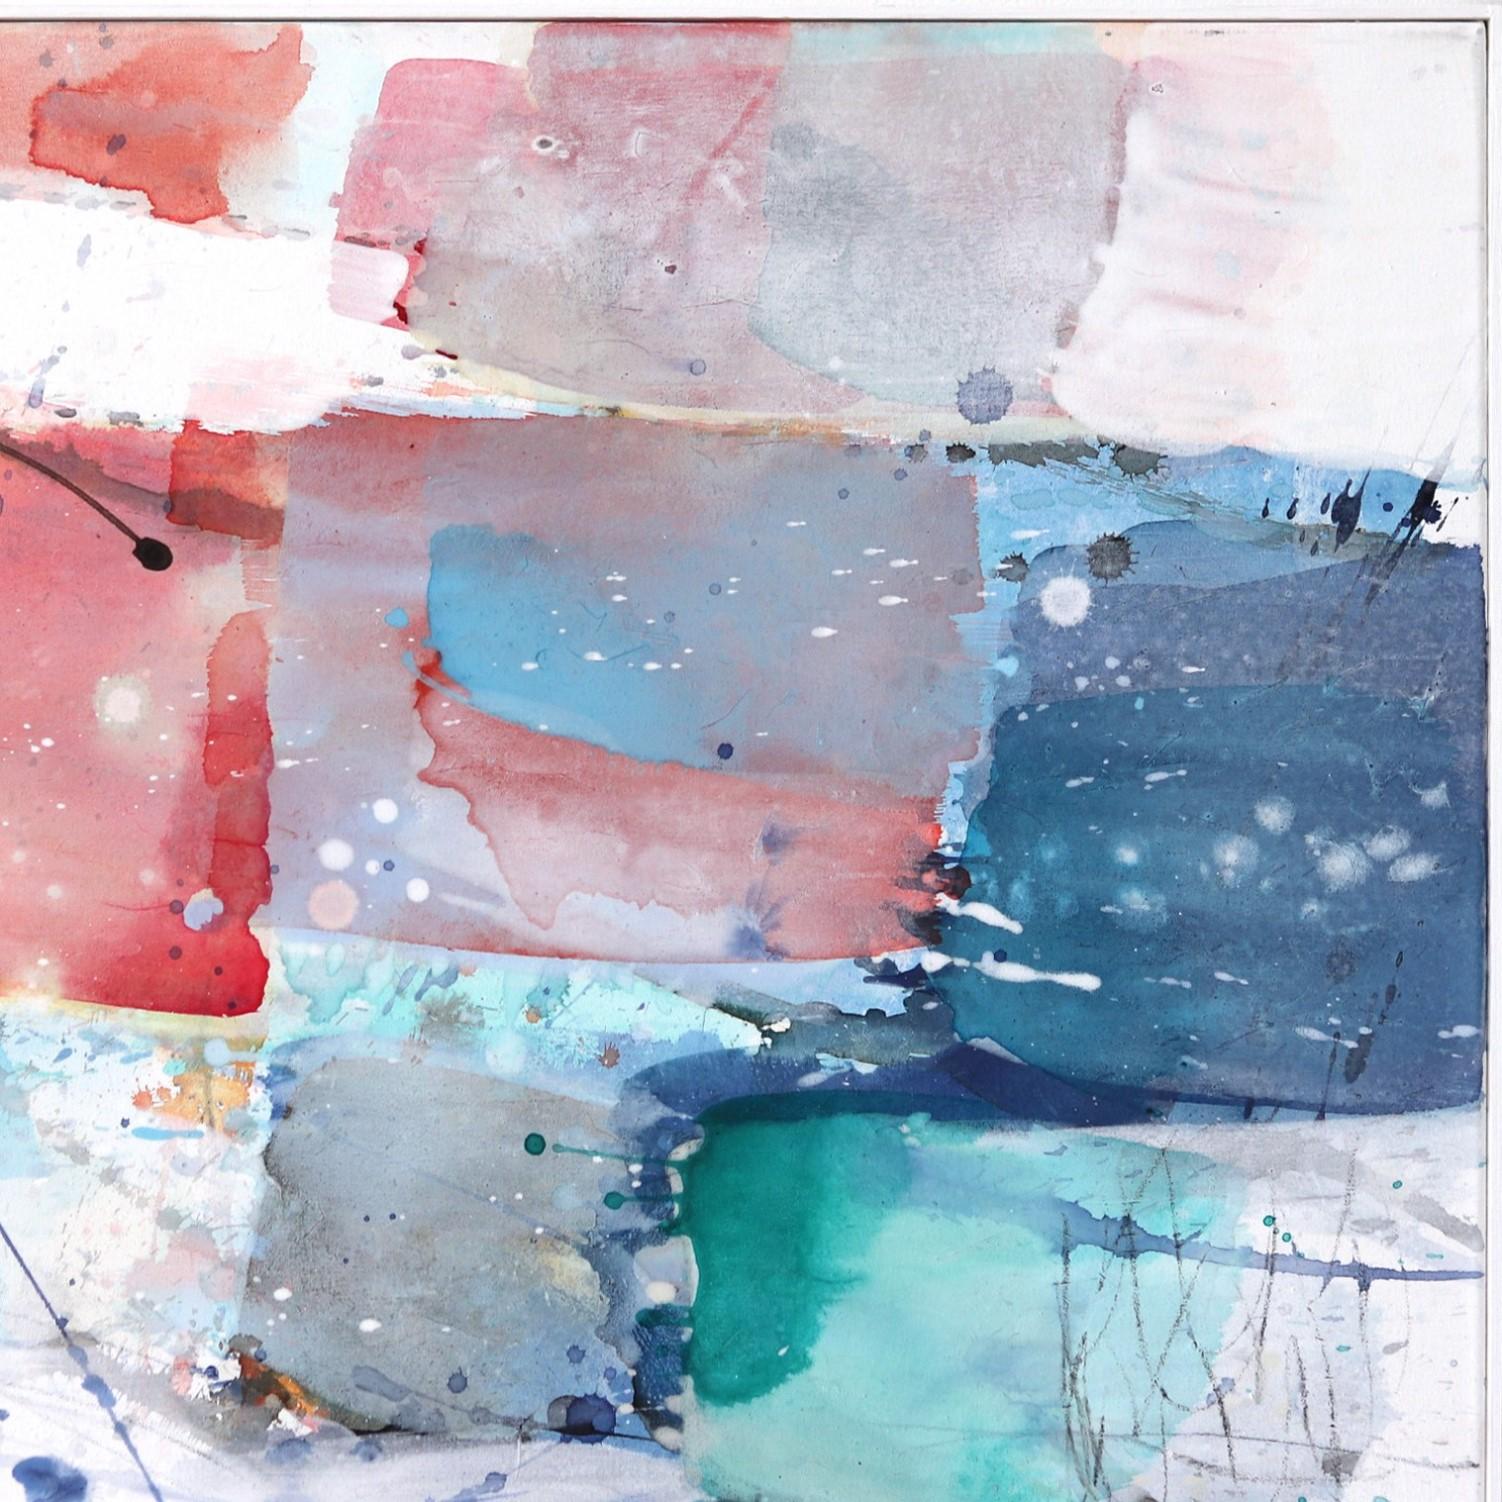 Belgian artist Greet Helsen masterfully layers acrylic paint with the effervescent transparency of watercolors in her large mixed-media abstract paintings. Reminiscent of abstract expressionism and lively color field paintings of Helen